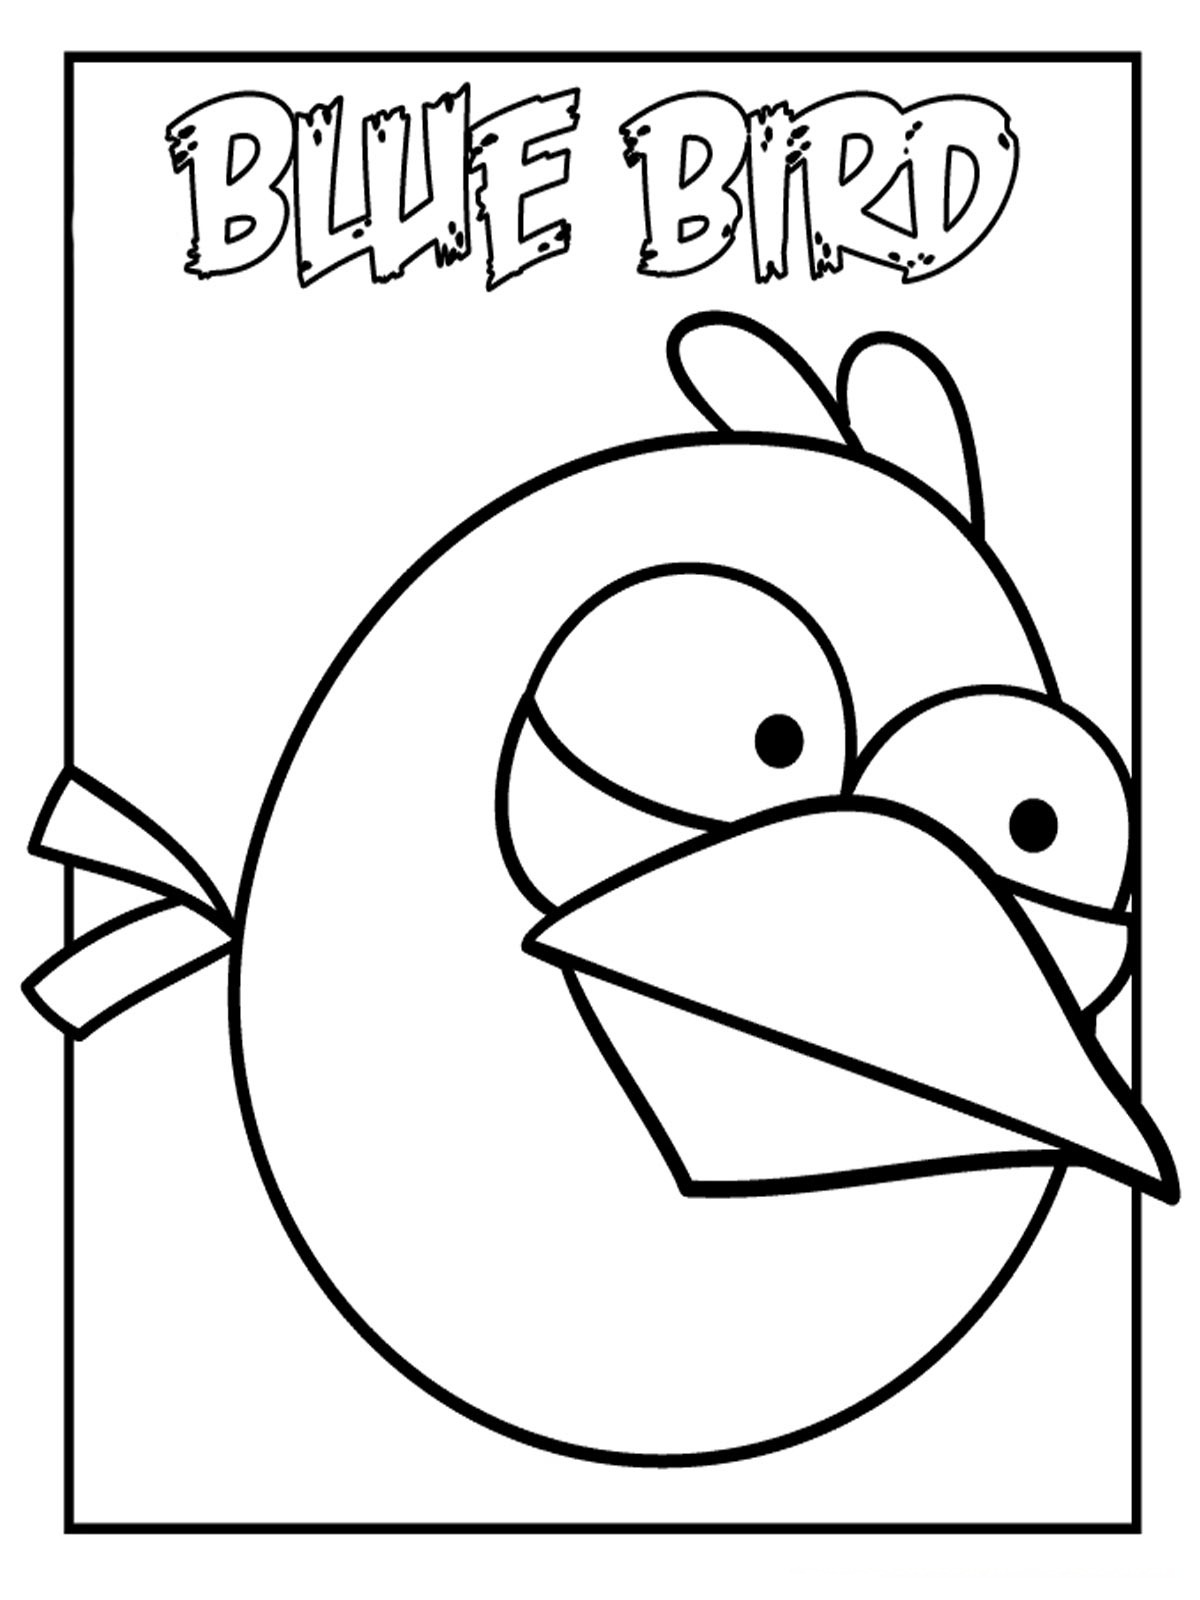 Download Angry Birds Coloring Pages For Kids | Realistic Coloring Pages